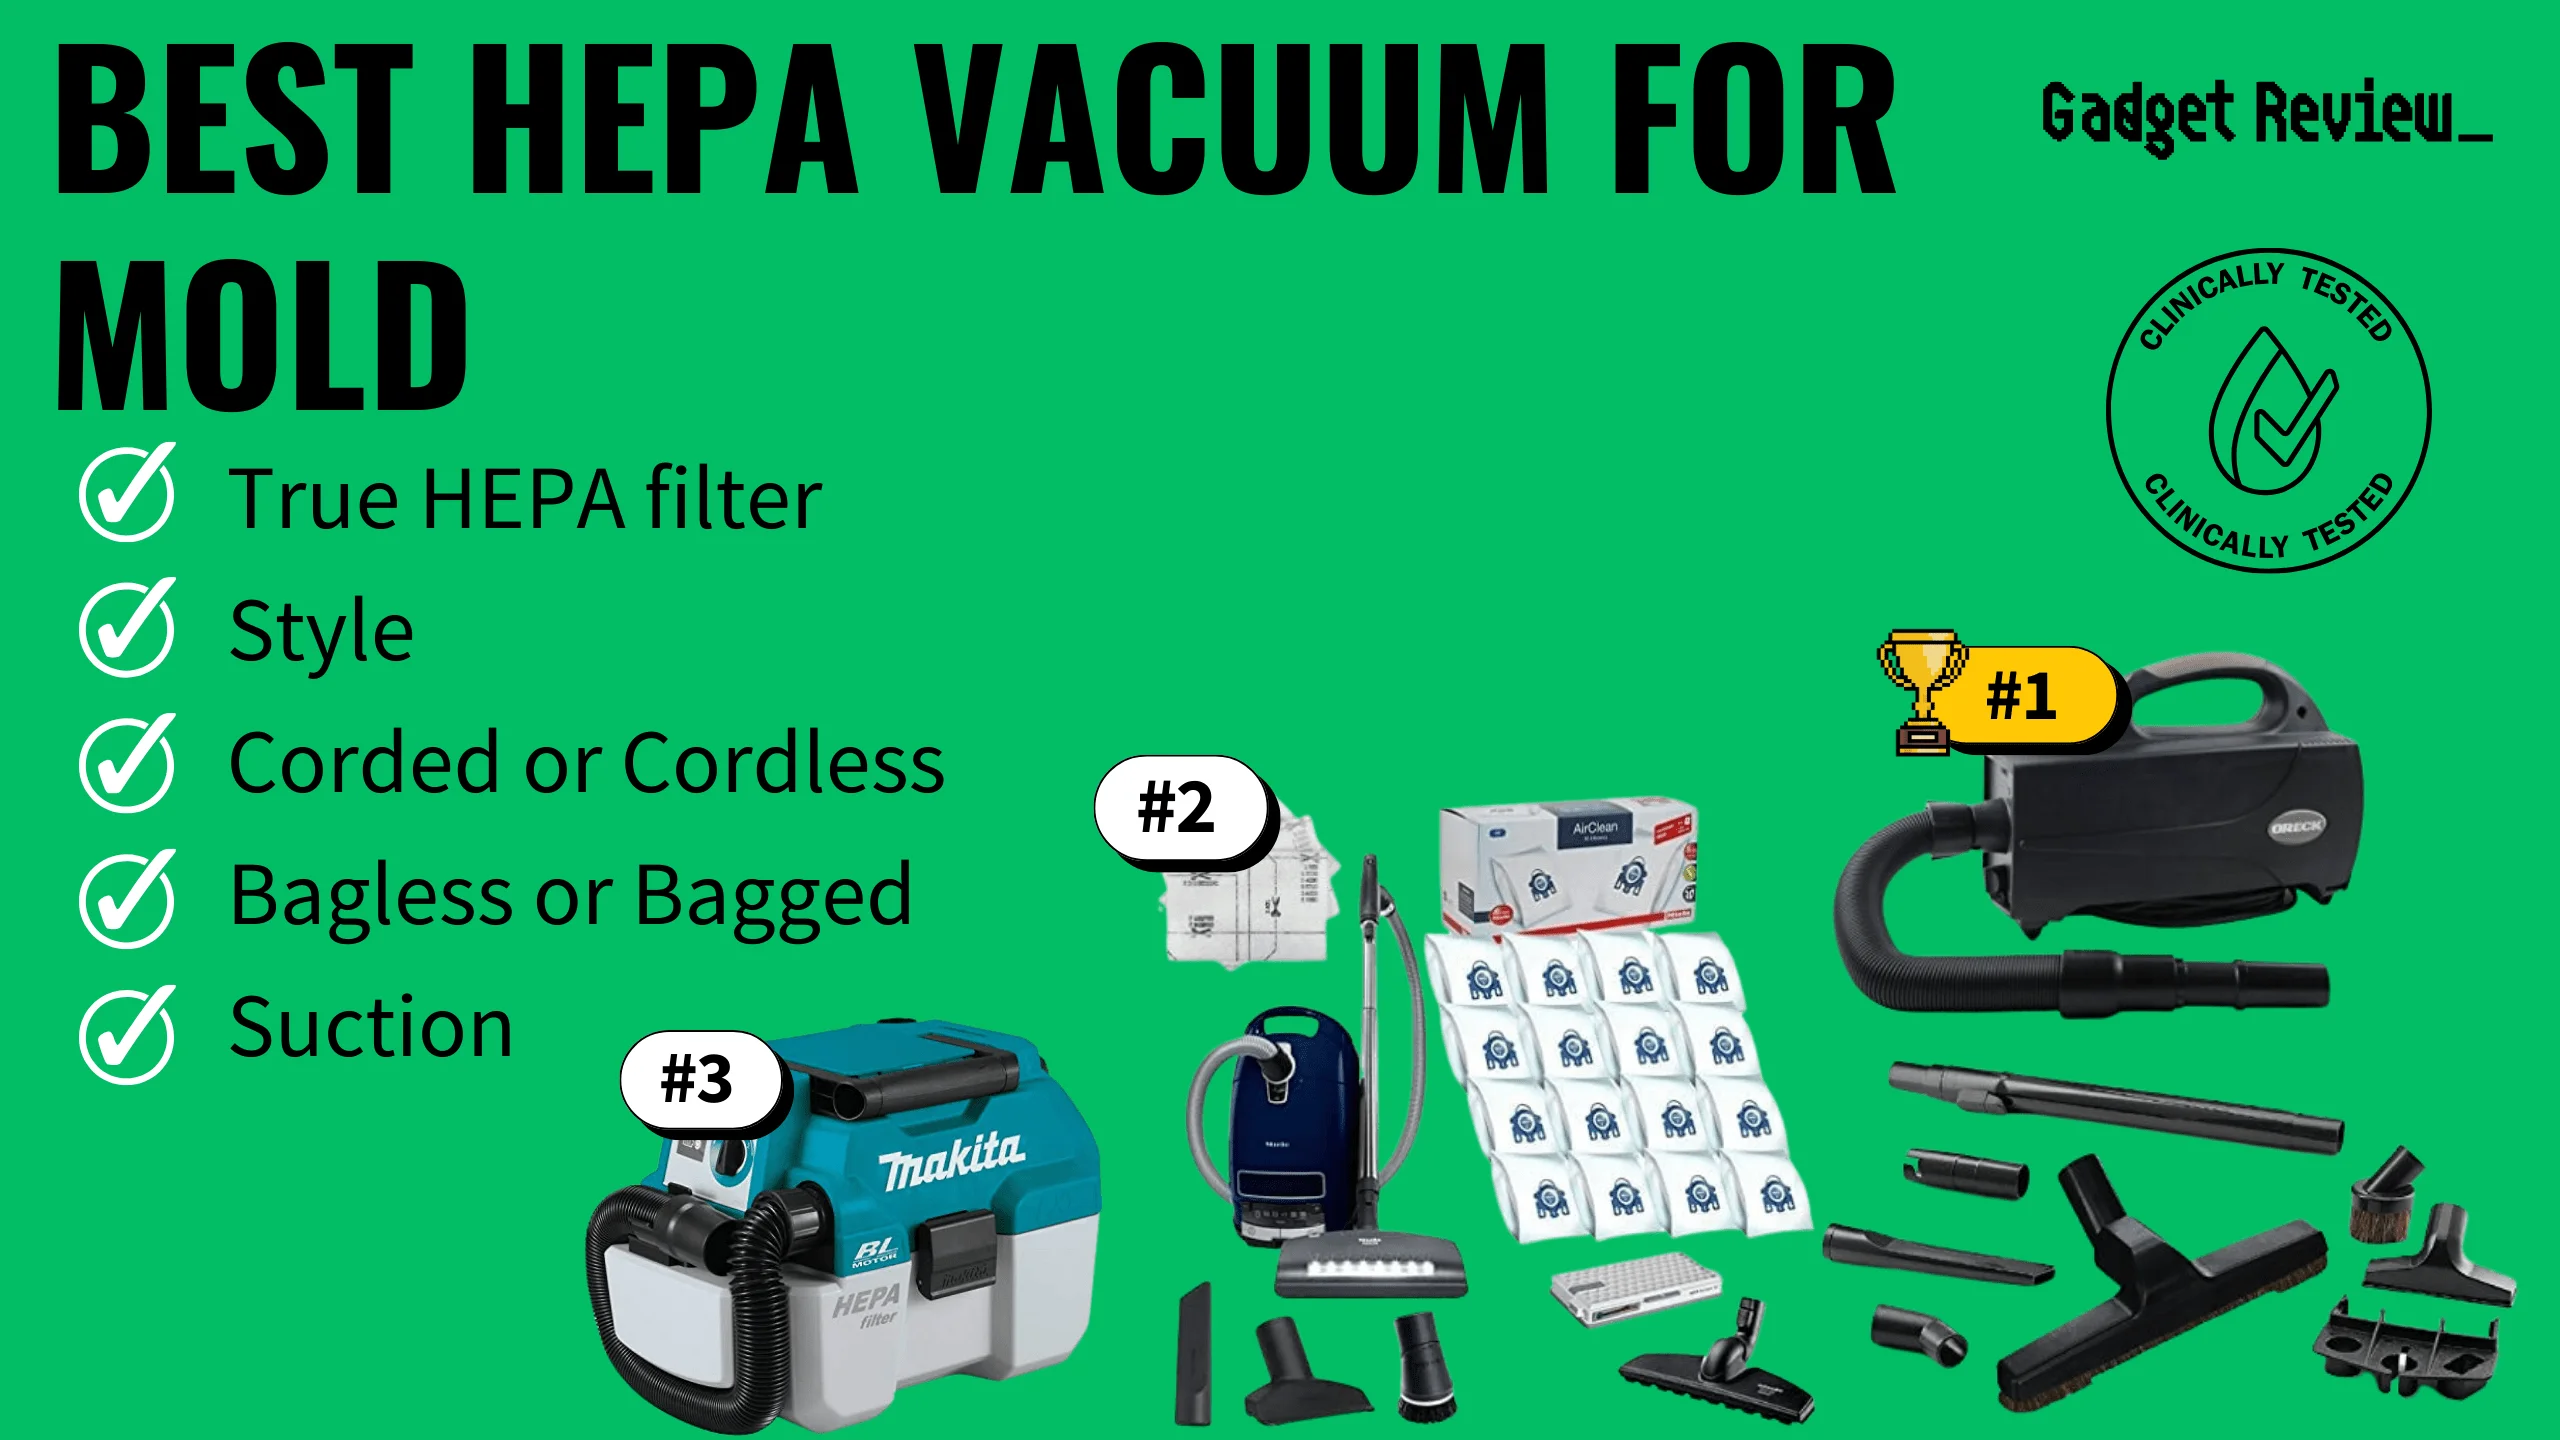 best hepa vacuum for mold featured image that shows the top three best vacuum cleaner models